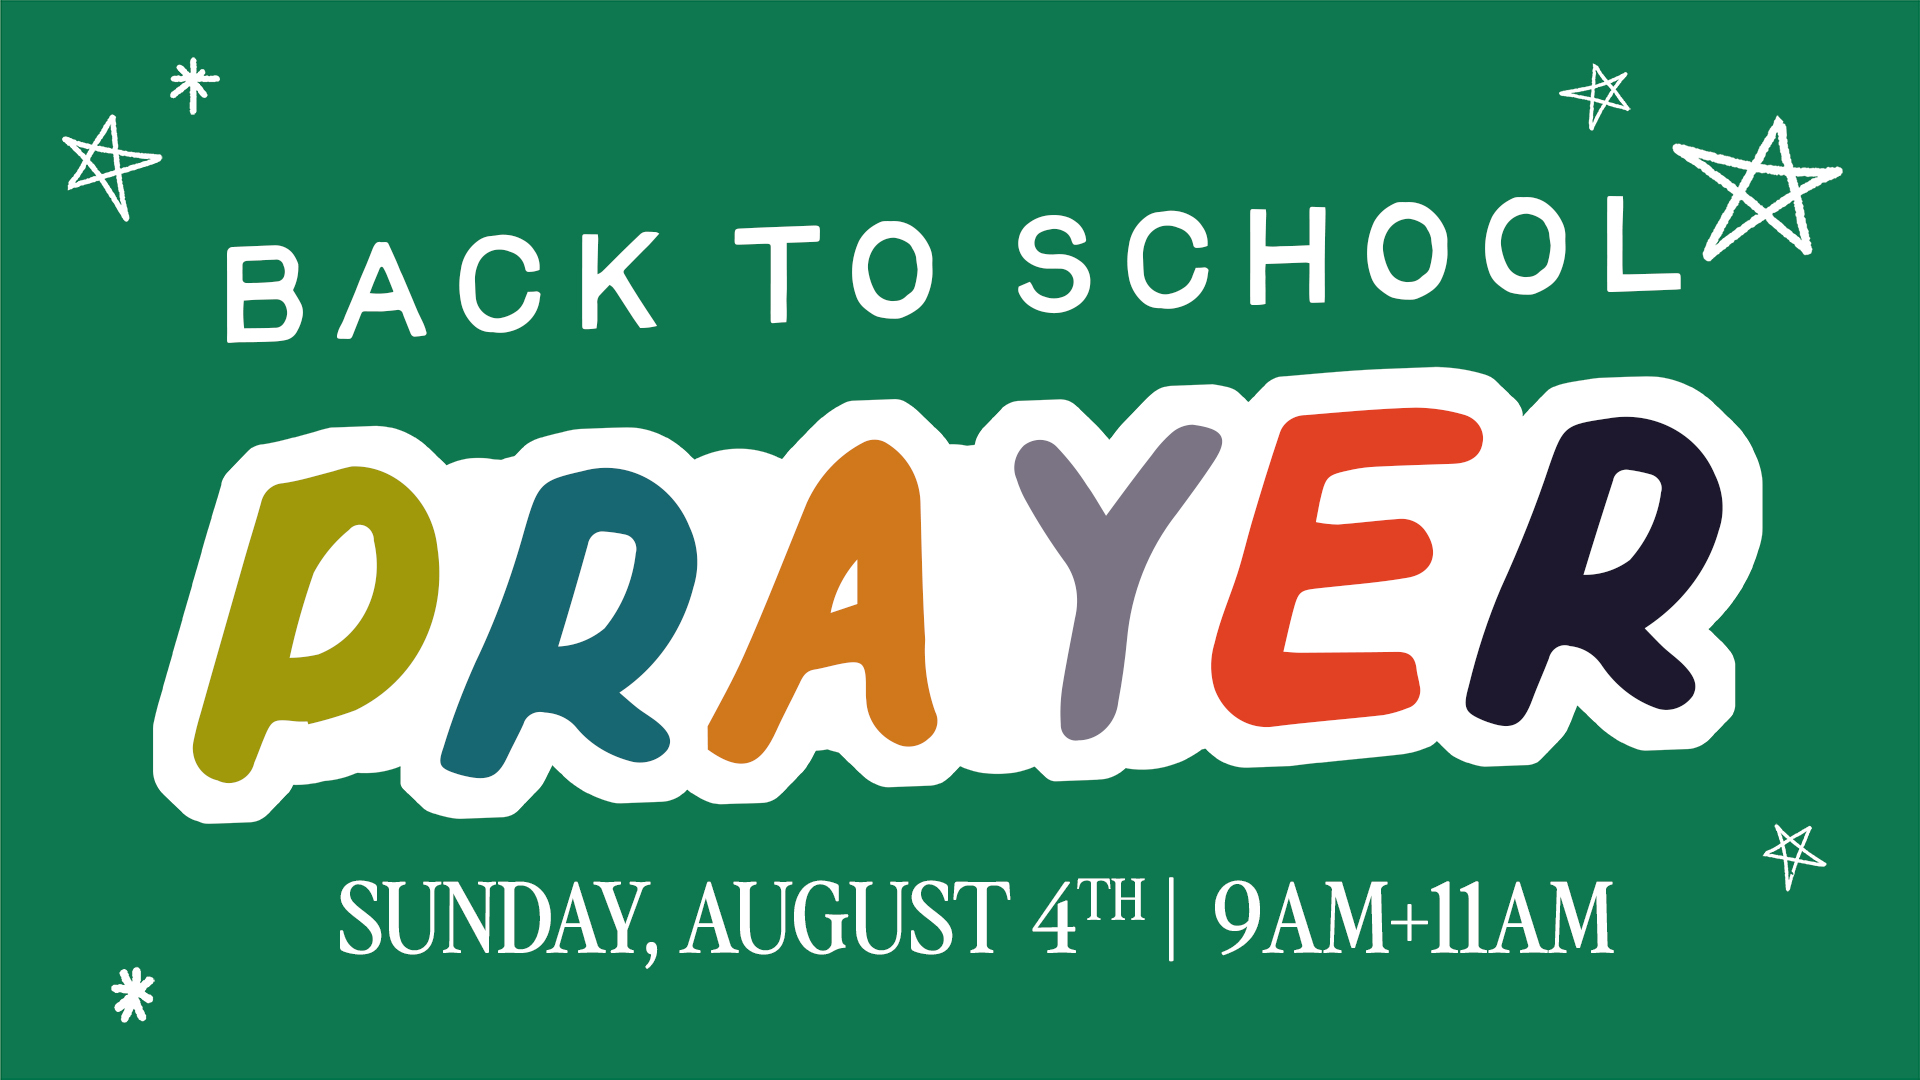 Back to School Prayer at the Gainesville campus